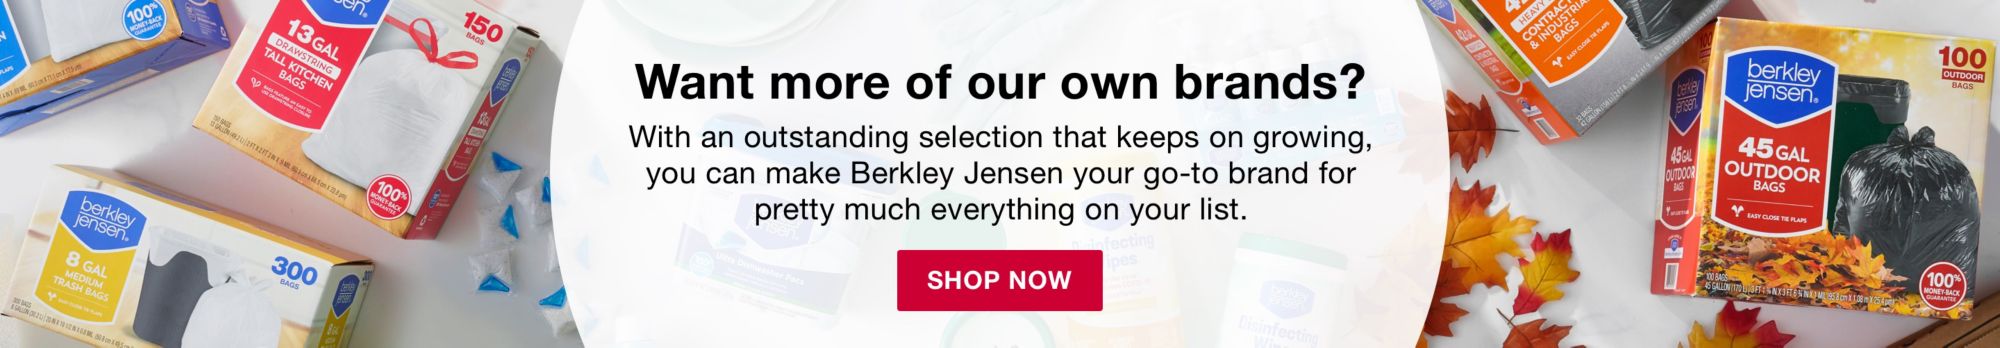 Want more of our own brands? Click to shop Berkley Jensen